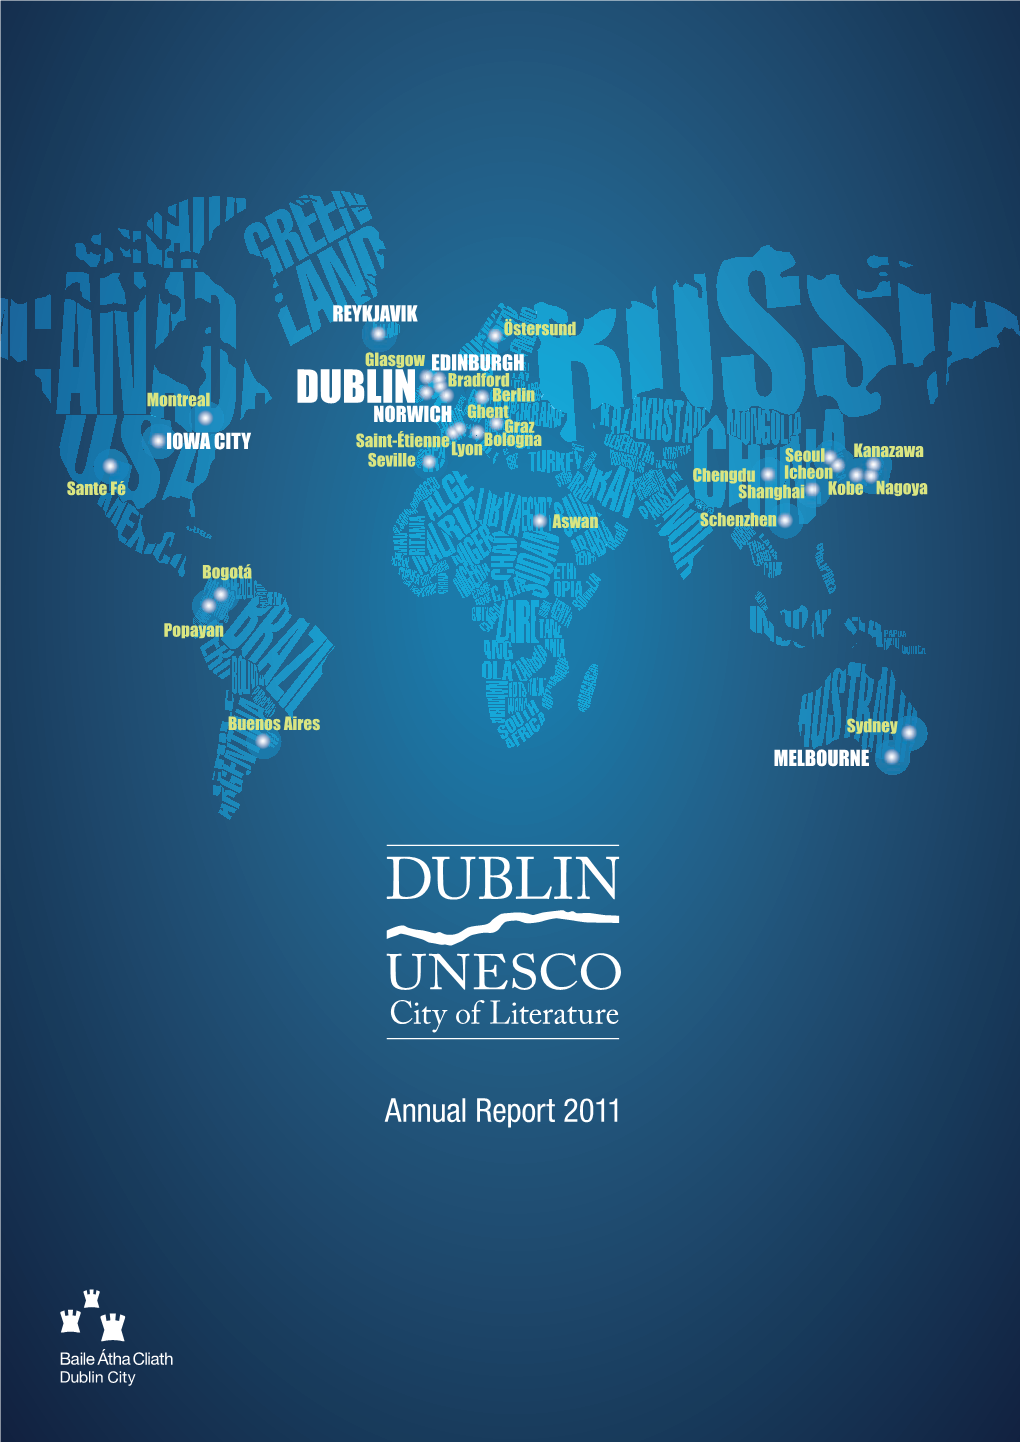 Download Annual Report 2010-2011